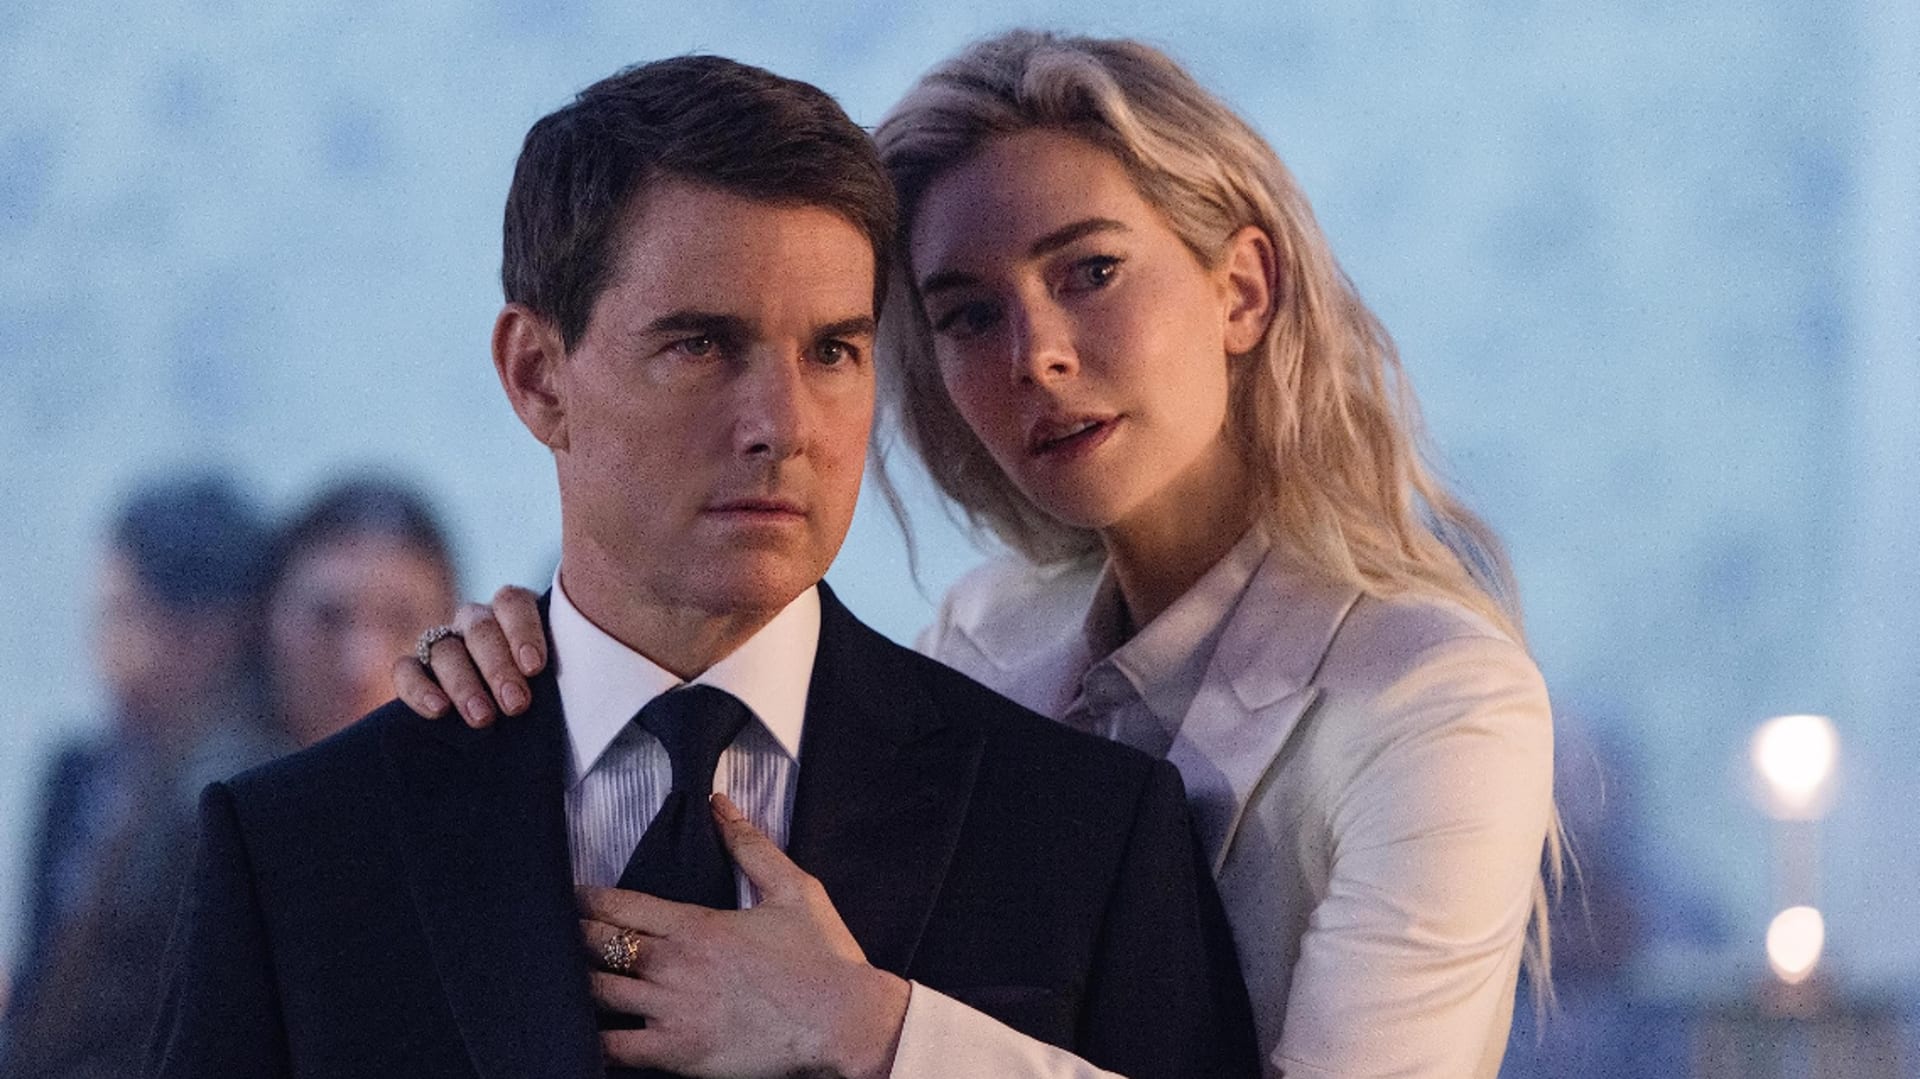 All you need to know before watching 'Mission: Impossible 7'